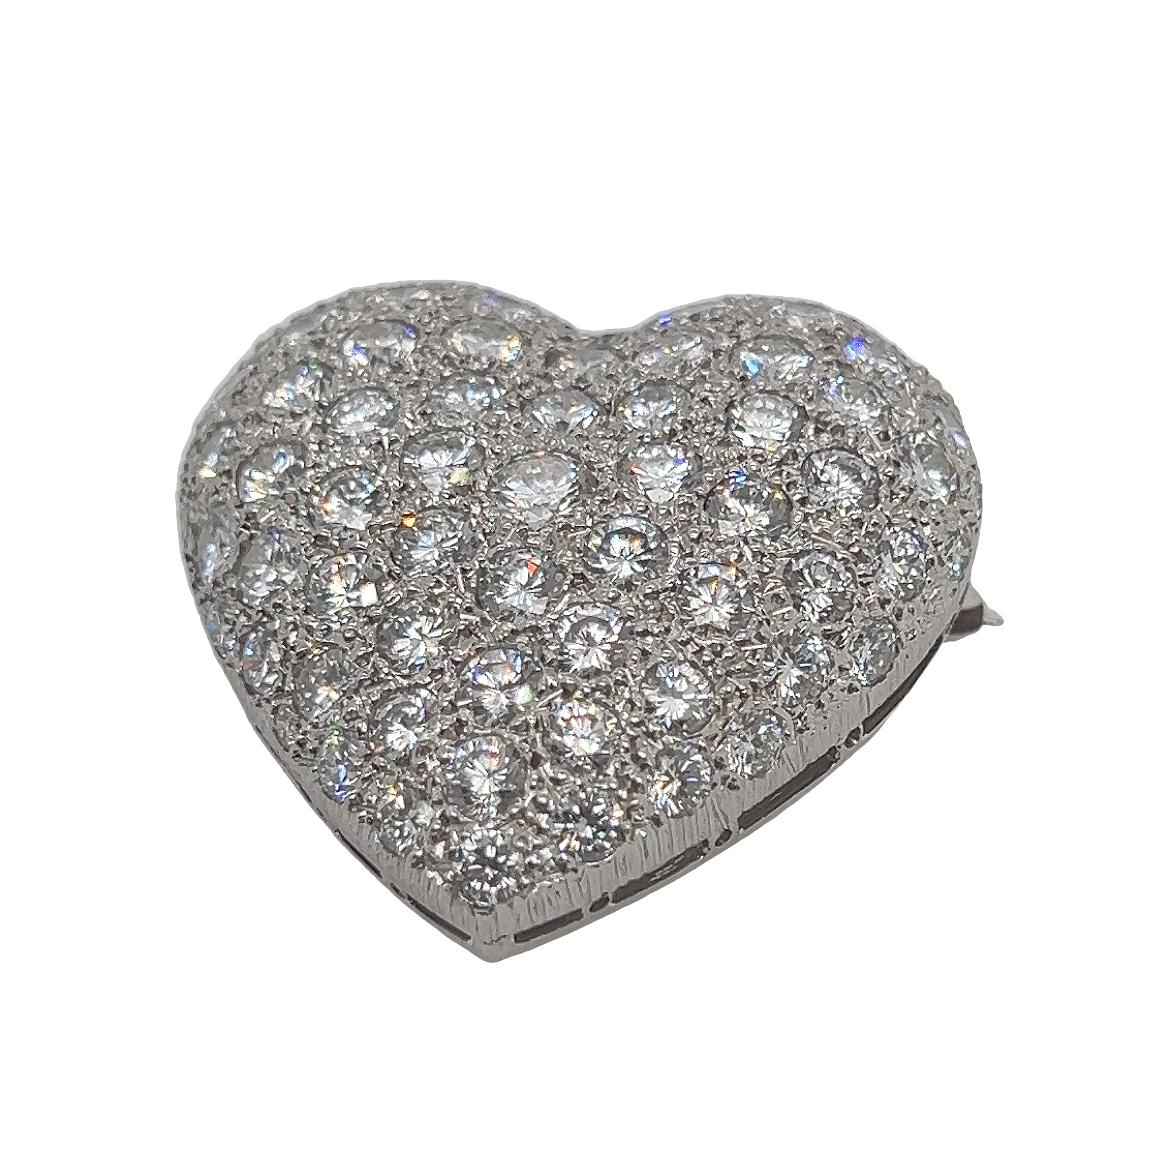 Add a touch of timeless elegance to your ensemble with this exquisite diamond heart brooch. Crafted in 18k gold, this stunning piece dates back to the glamorous 1960s and features 5cts of brilliant cut diamonds that sparkle with unmatched